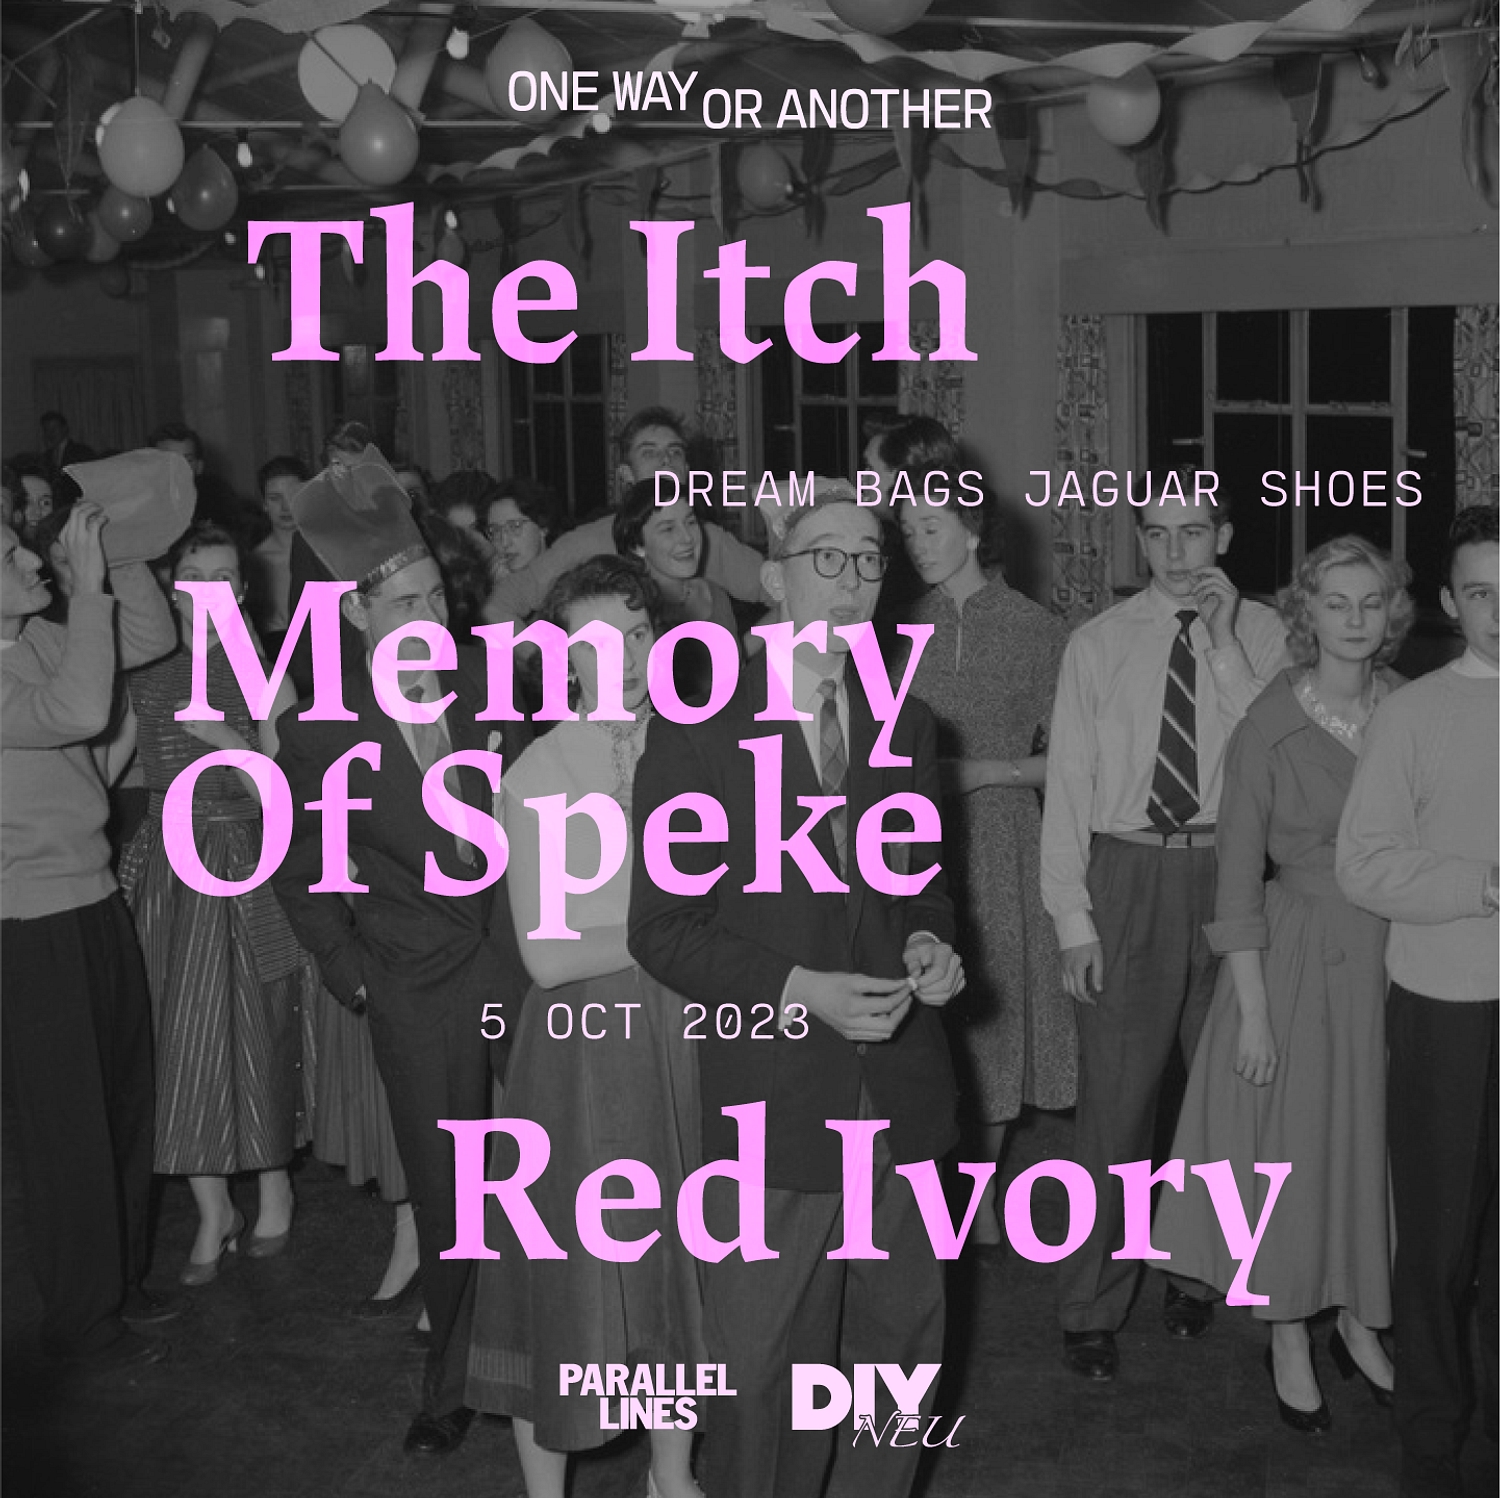 The Itch, Memory Of Speke & Red Ivory to play first edition of One Way or Another